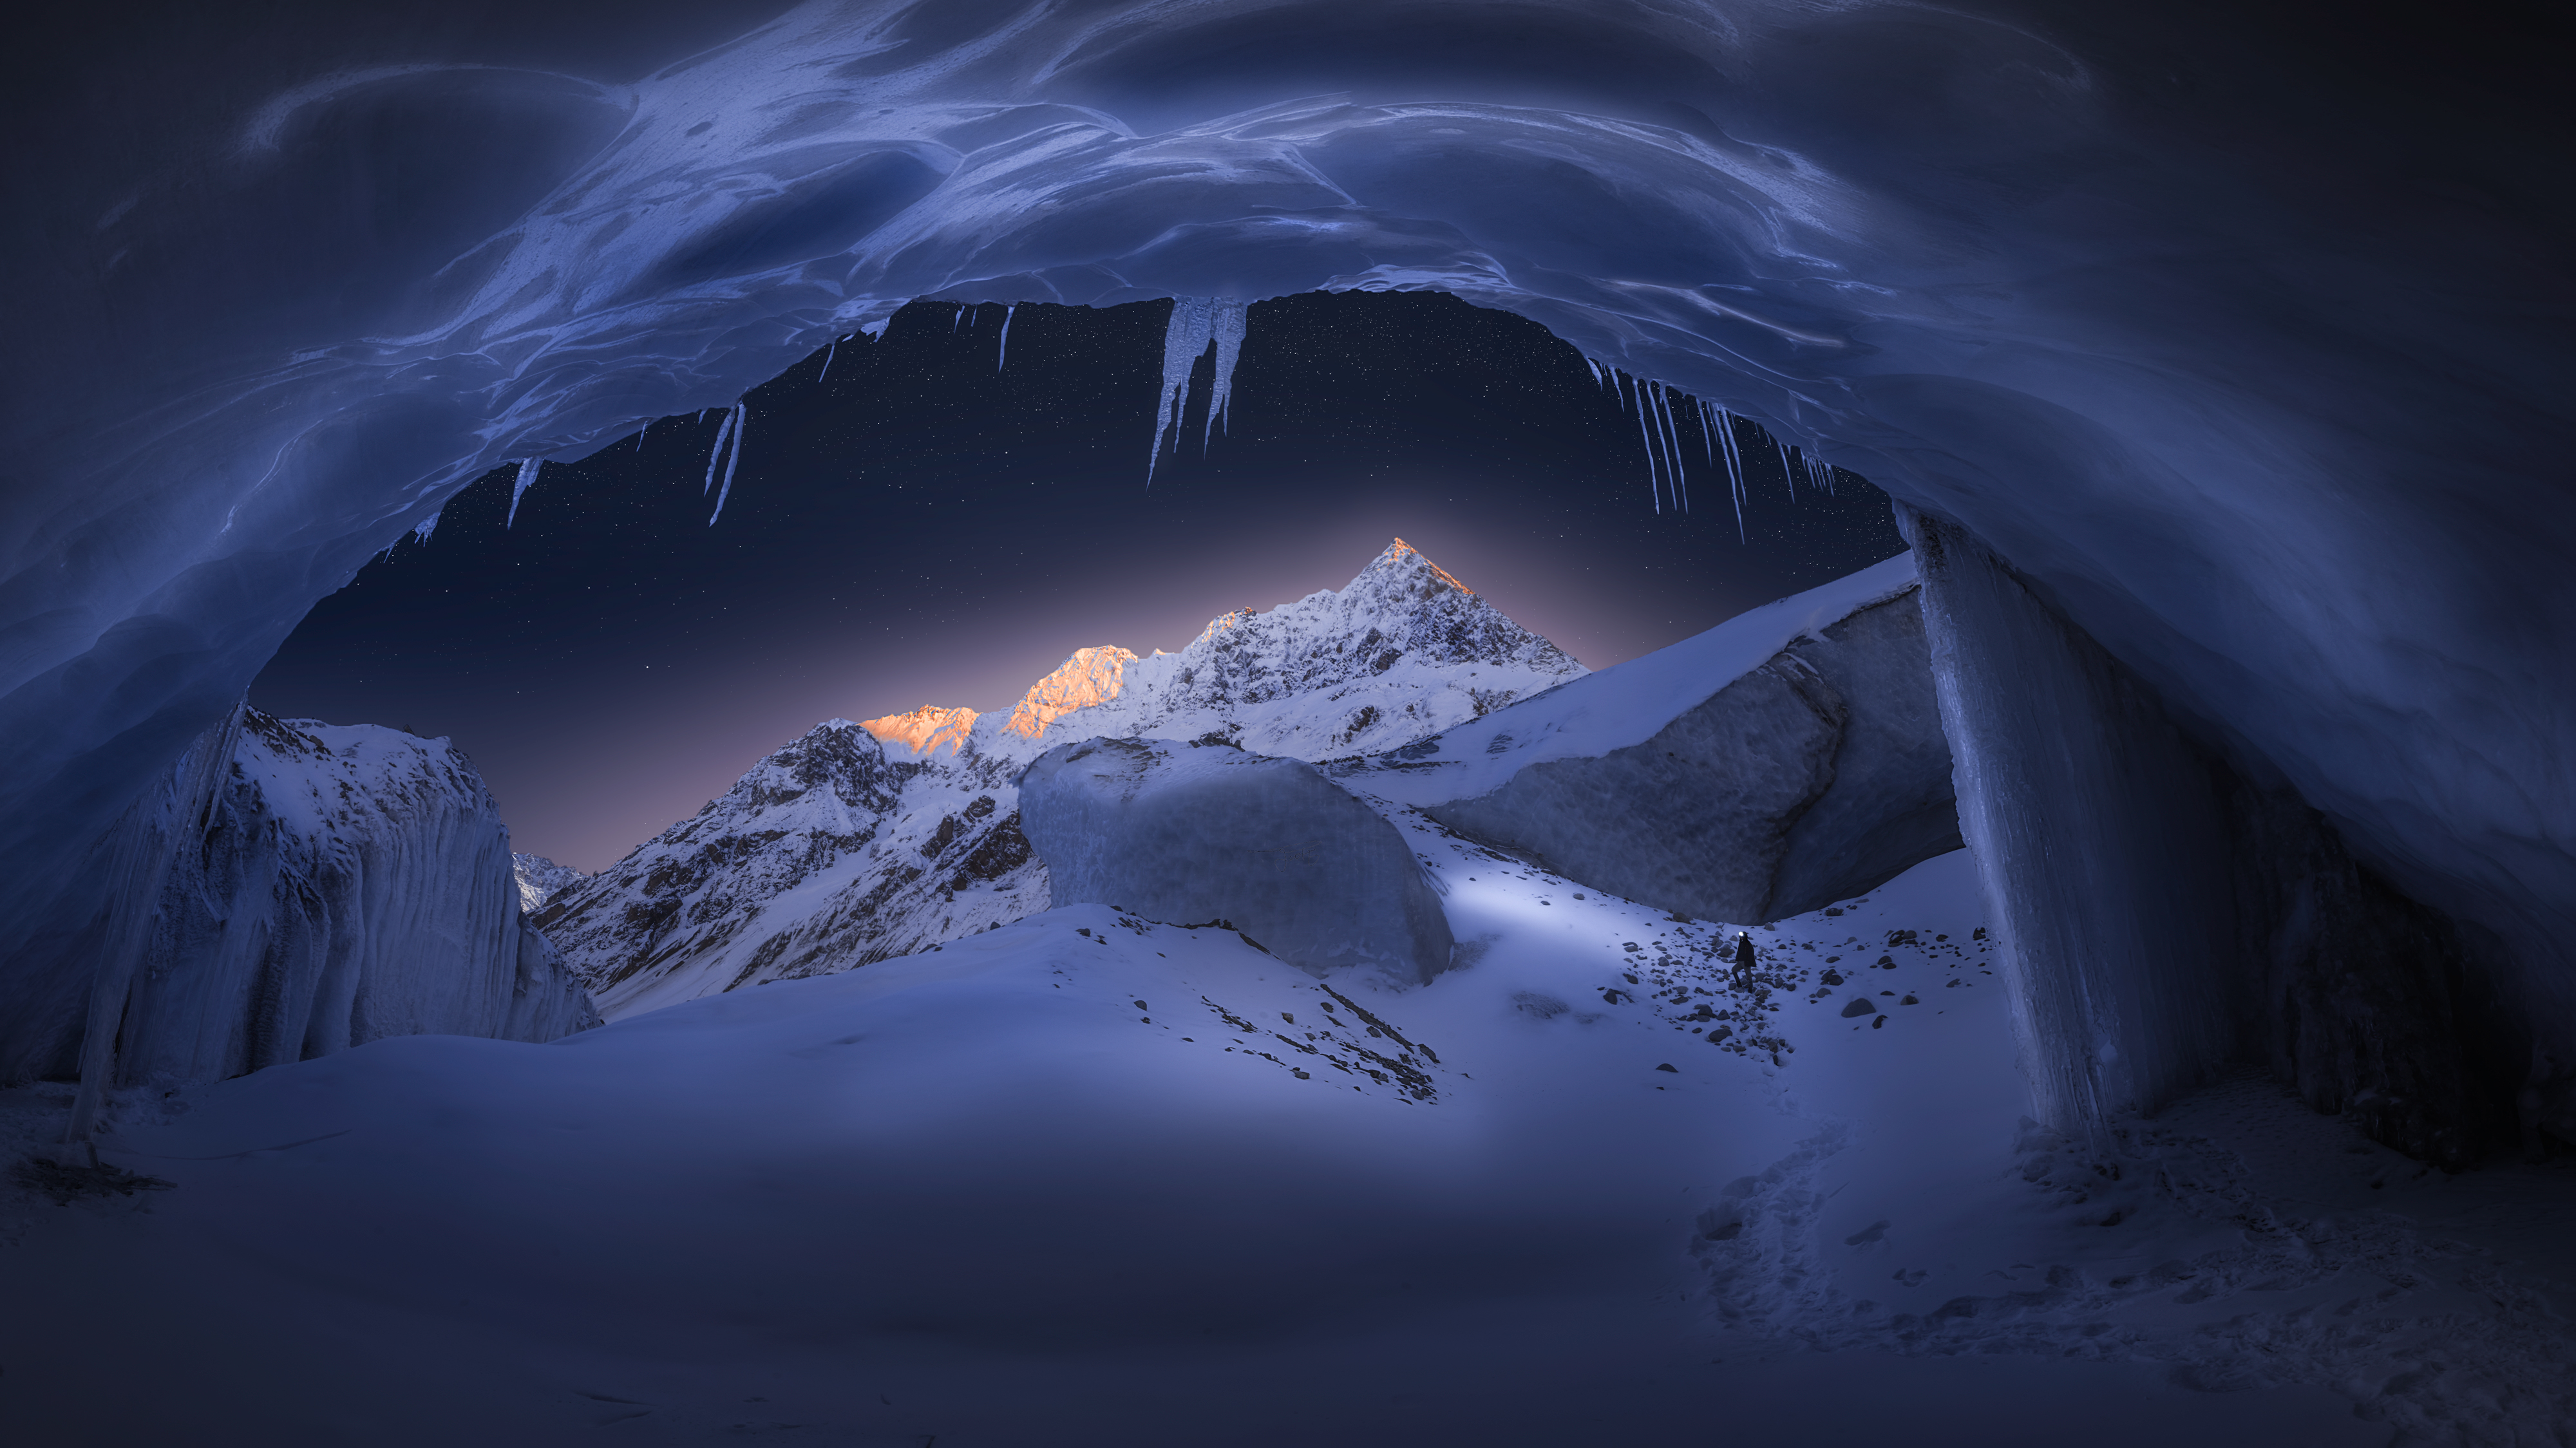 General 4000x2249 snowy peak Tibet landscape mountains mountain pass nature cave snow ice icicle